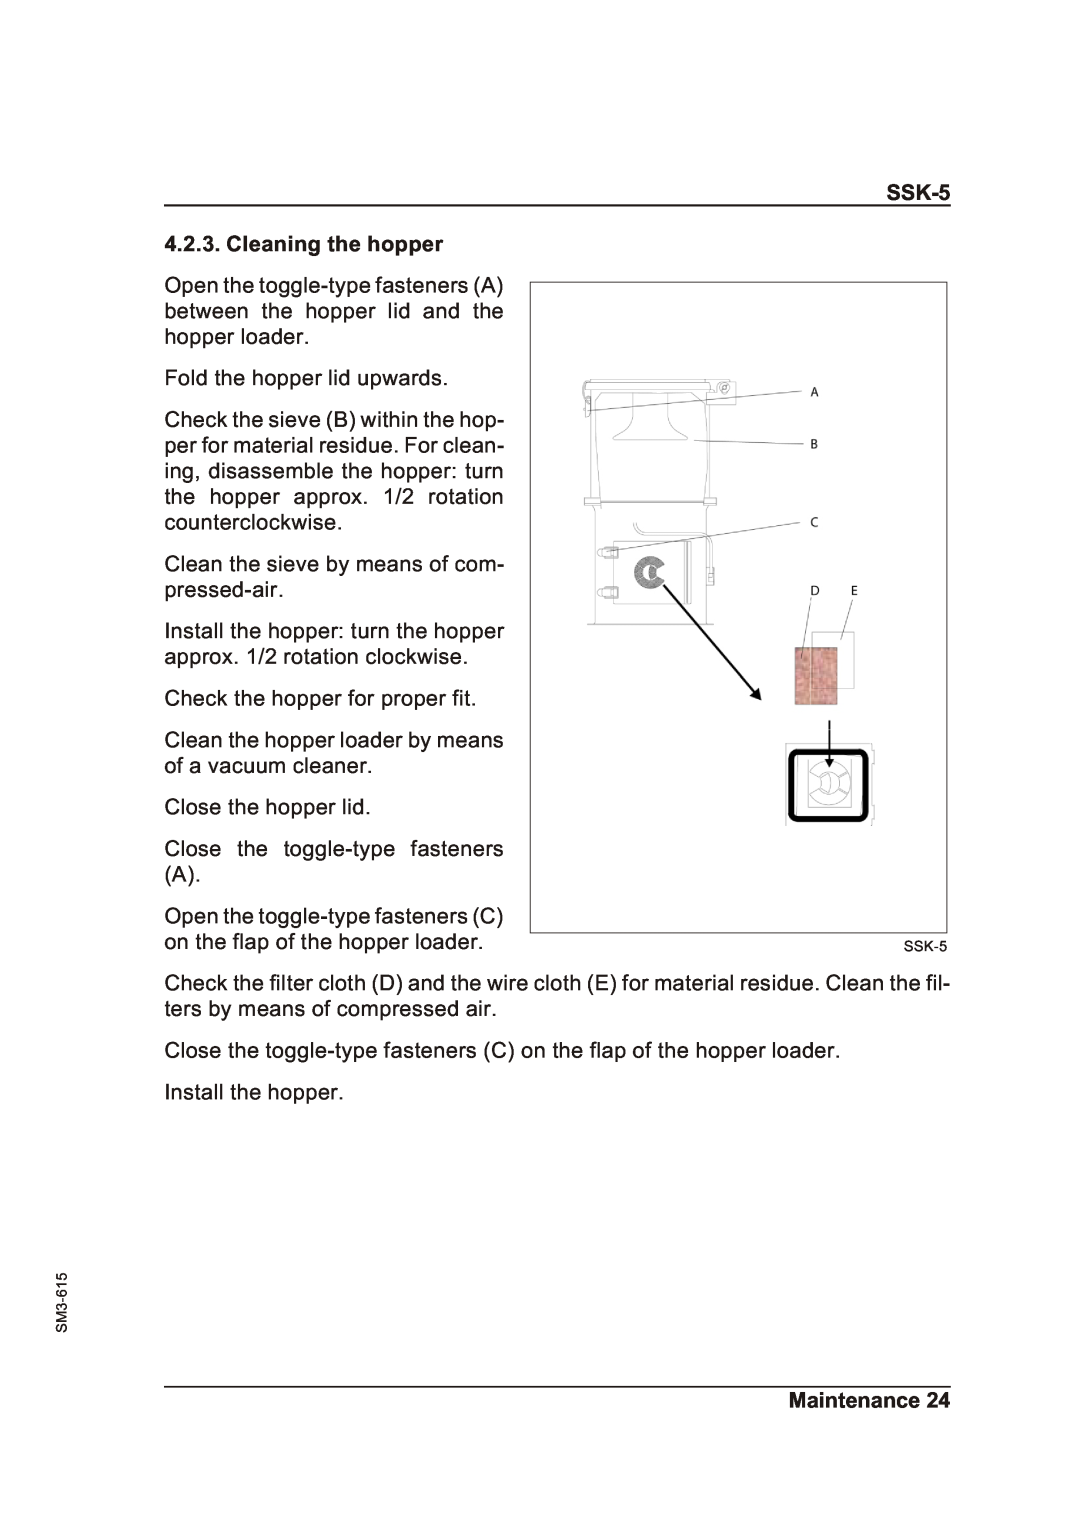 Sterling operating instructions SSK-5 4.2.3. Cleaning the hopper, Maintenance 